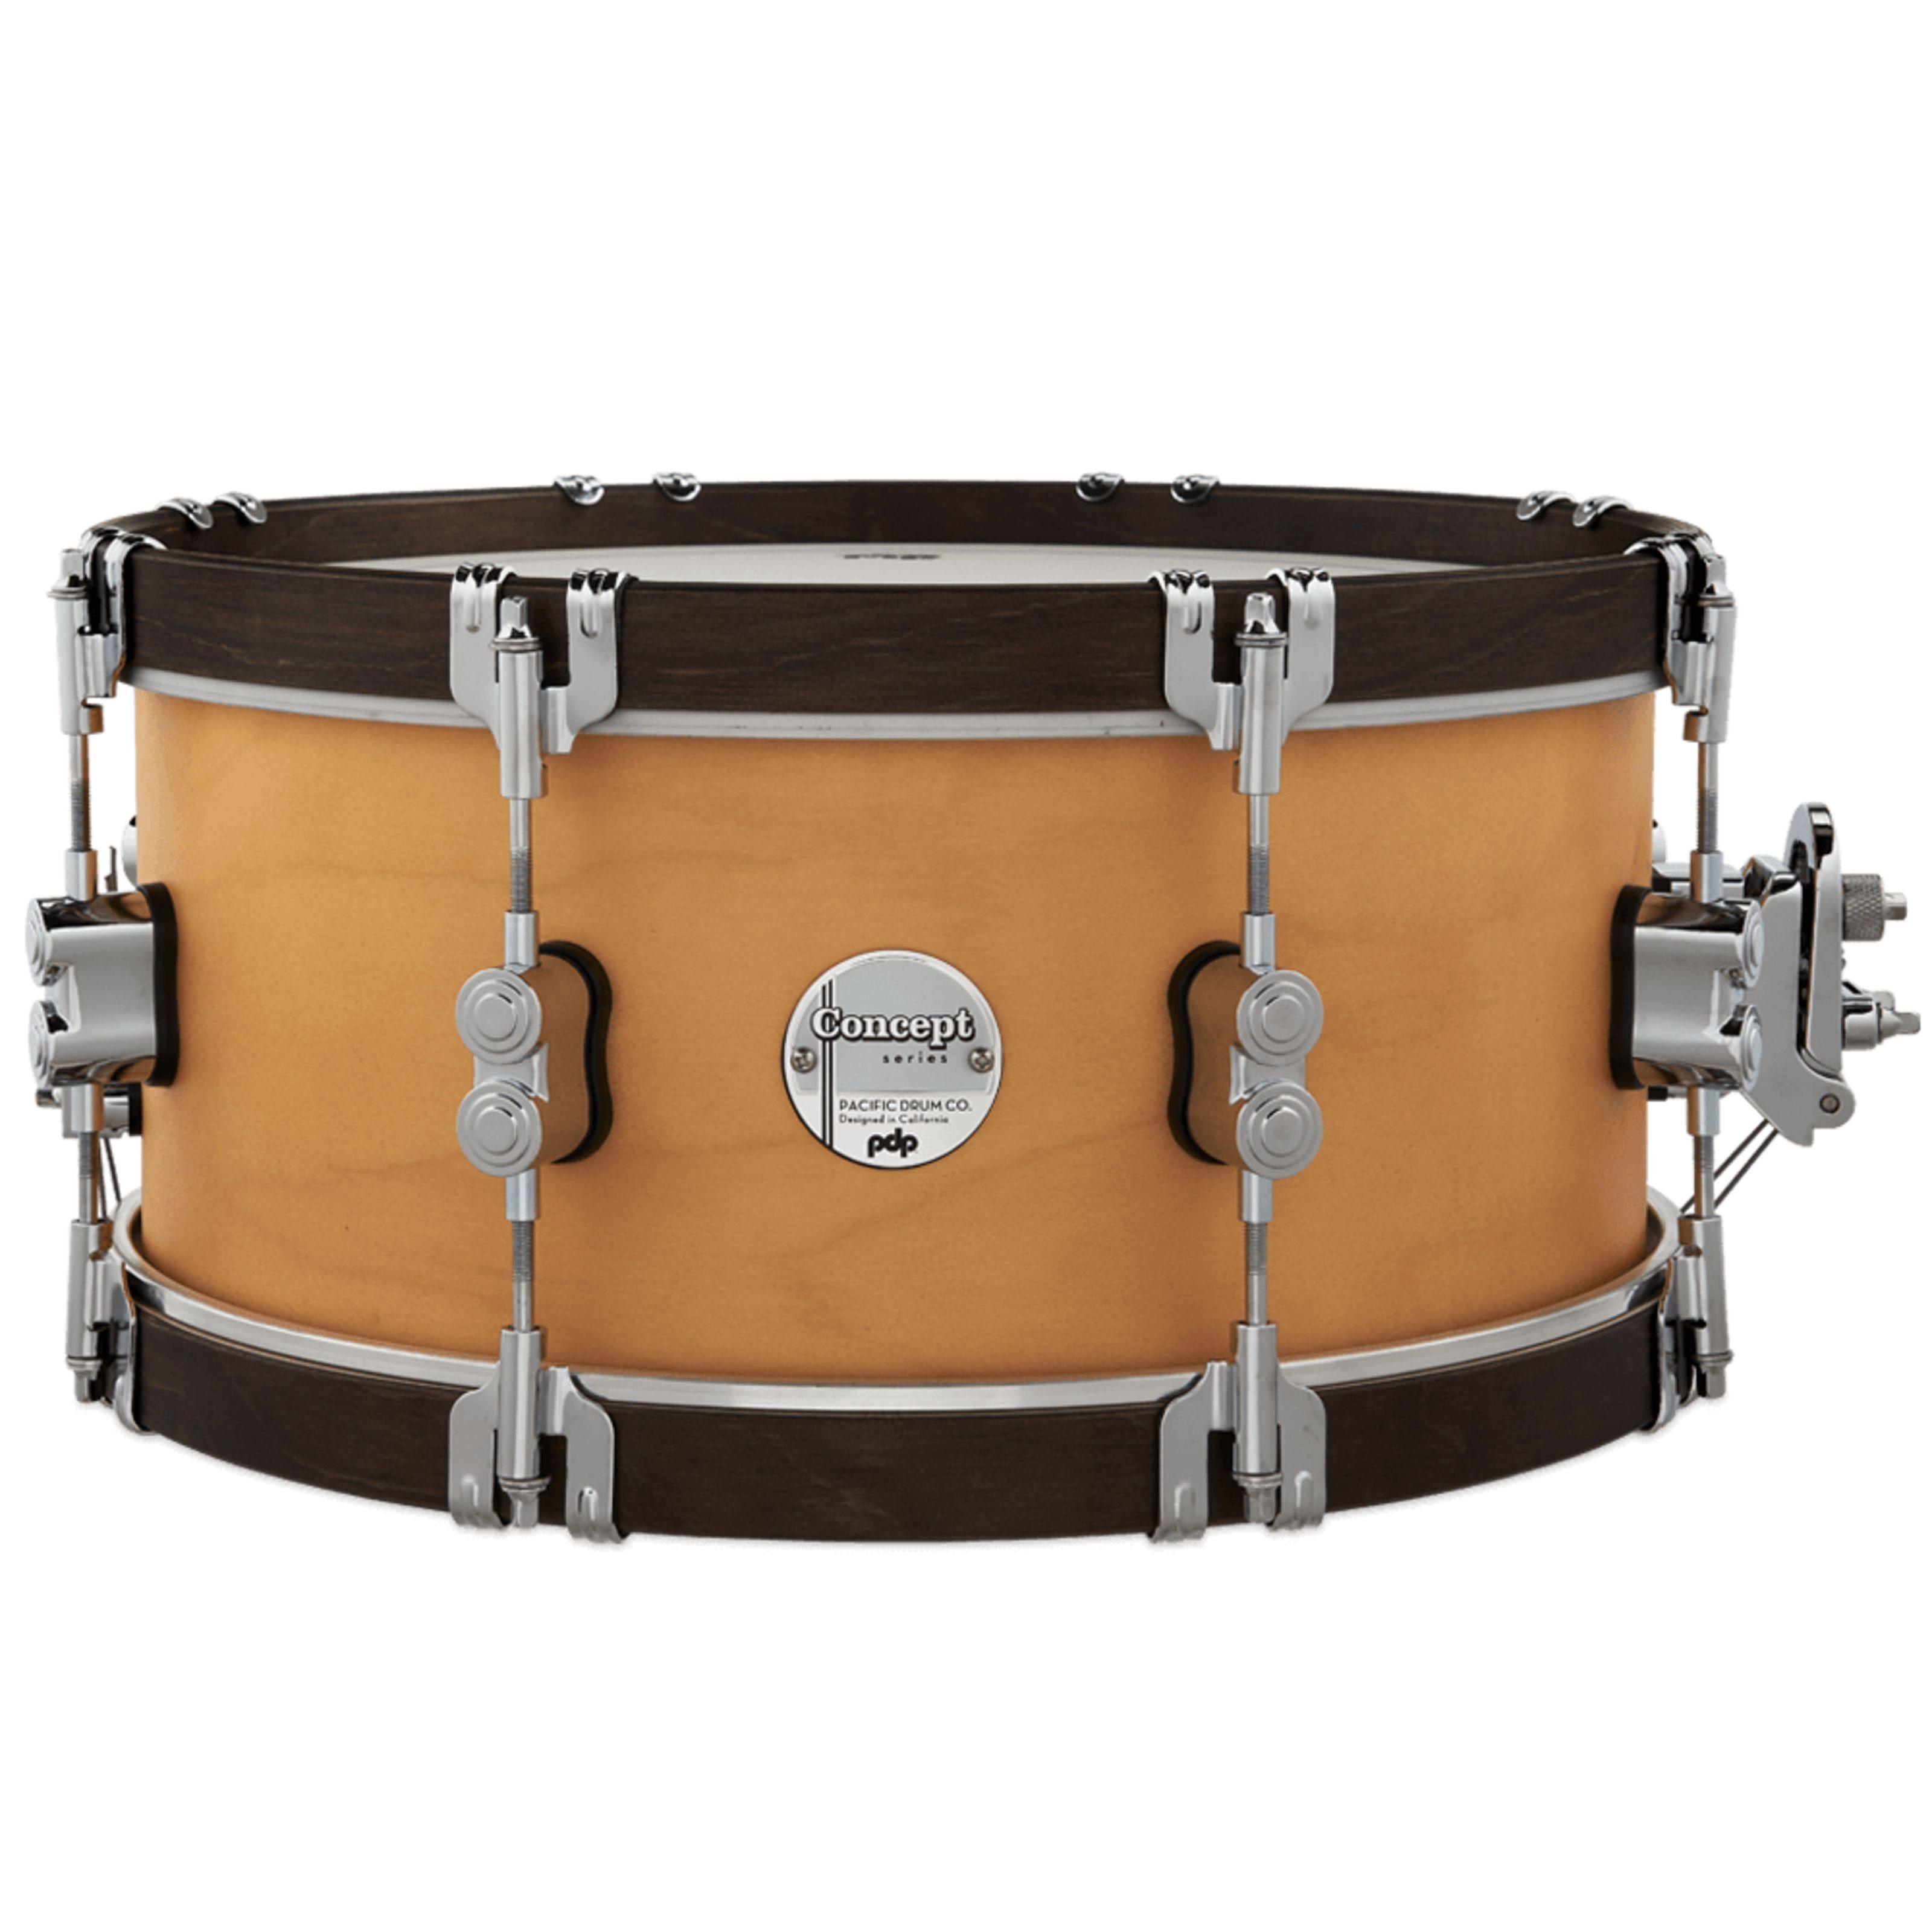 pdp Snare Drum,Concept Classic Snare 14"x65" Natural / Walnut Hoops, Schlagzeuge, Snare Drums, Concept Classic Snare 14"x6,5" Natural / Walnut Hoops - Snare Drum